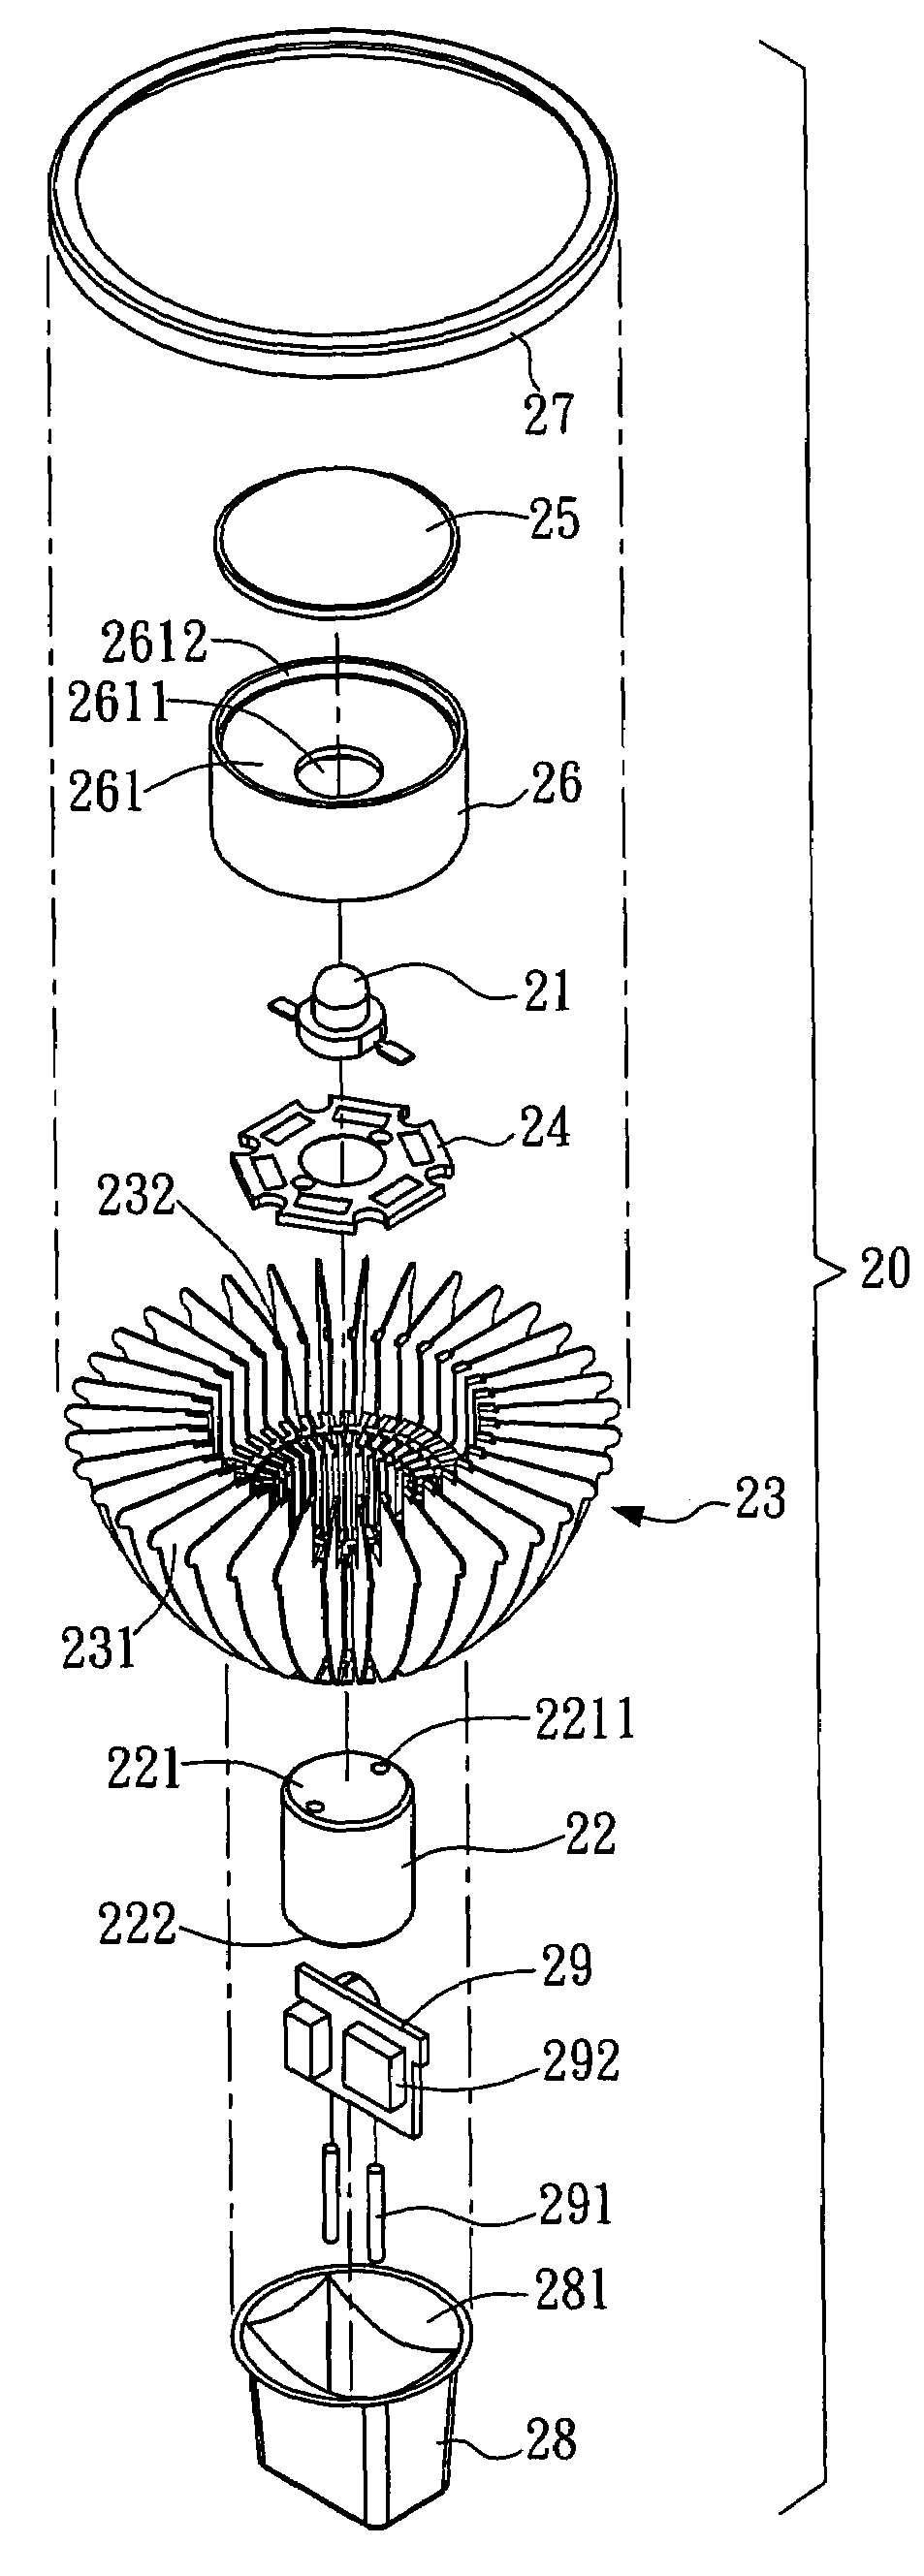 LED lamp with plural radially arranged heat sinks